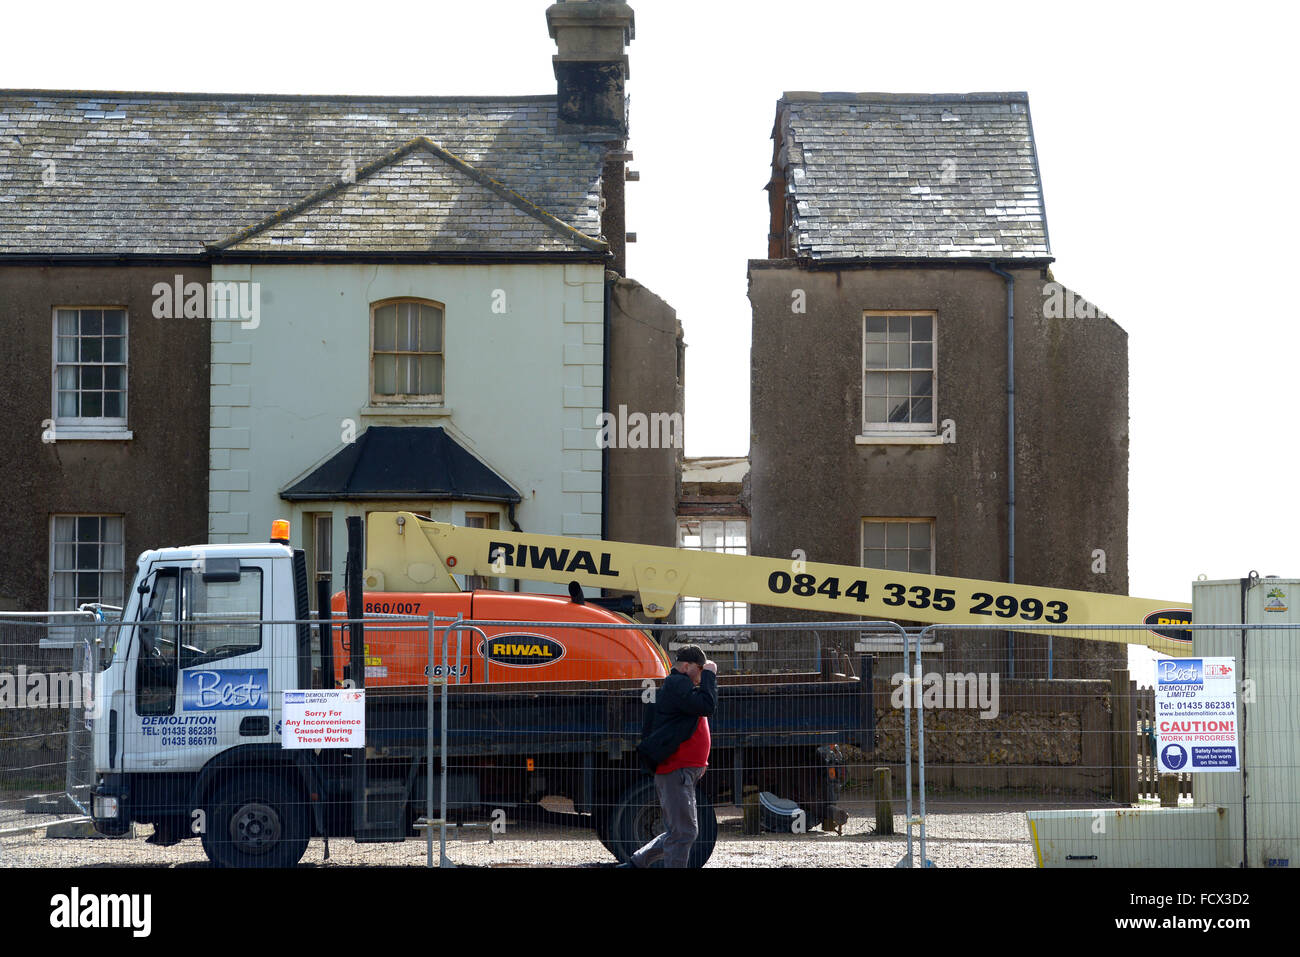 Demolition of Coastguard cottage at Birlng Gap, East Sussex, UK after winter storms eroded the chalk cliffs causing collapse Stock Photo